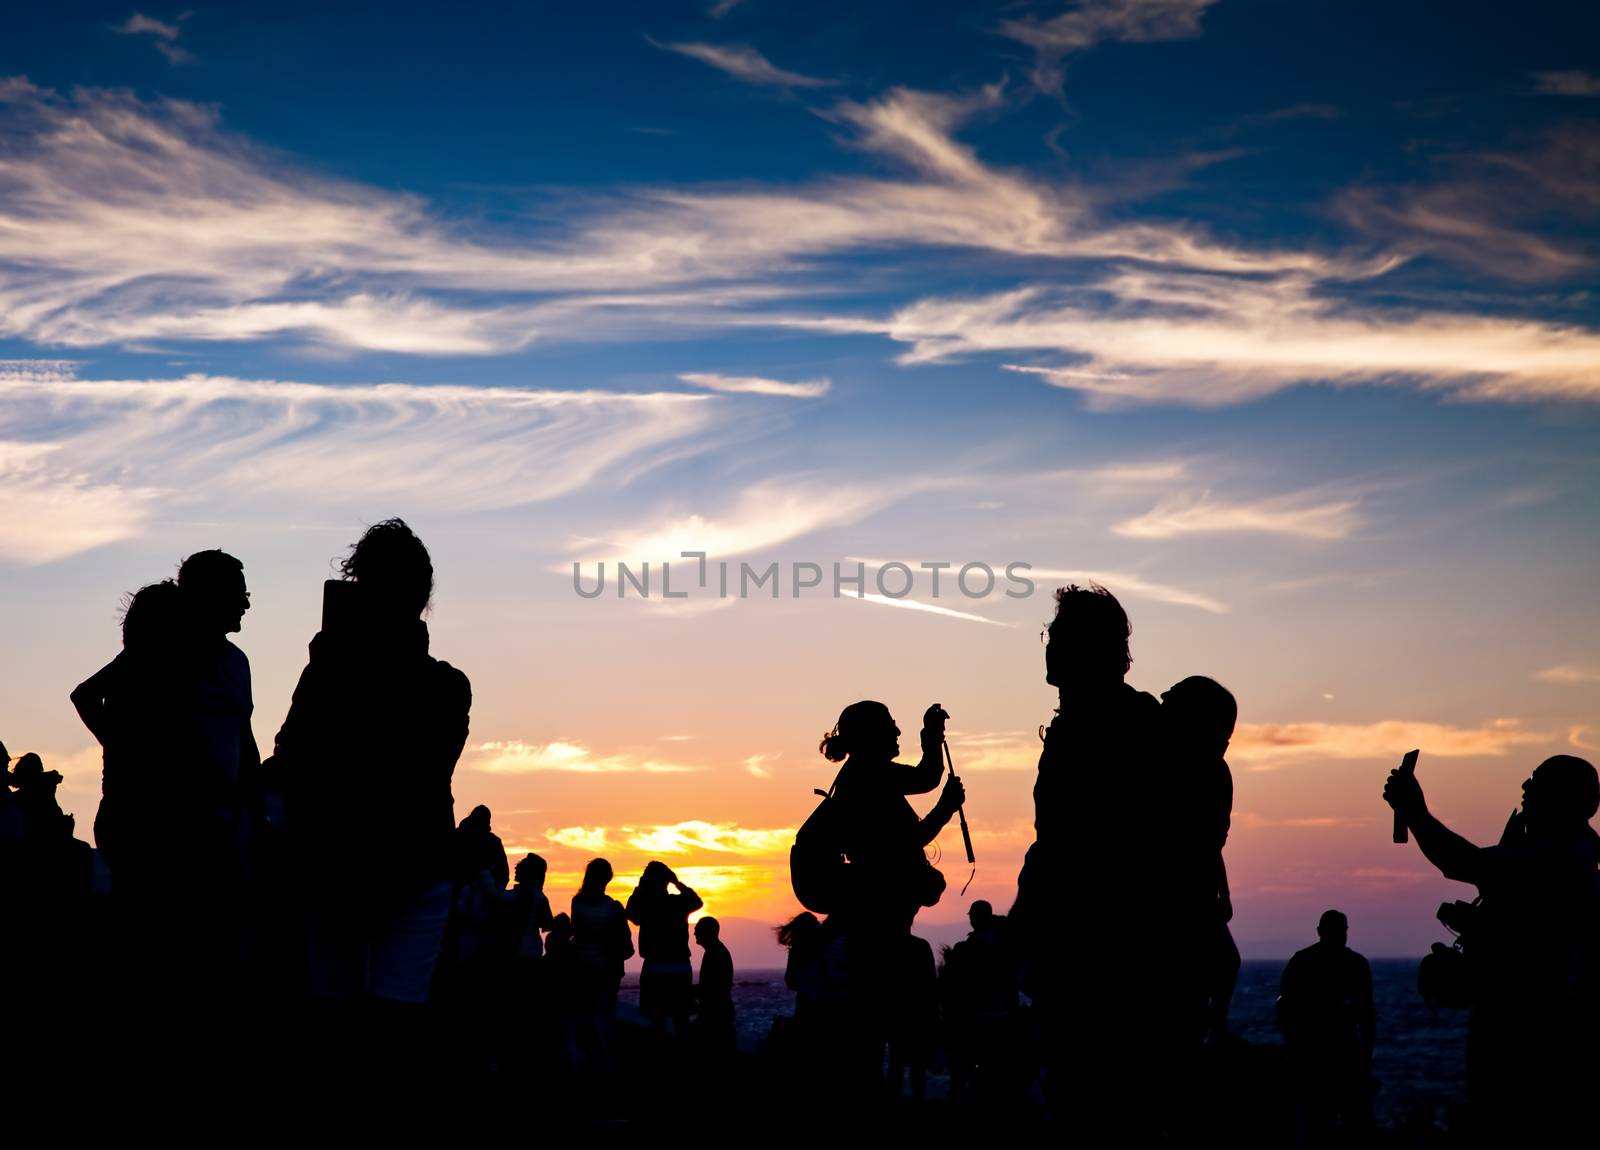 silhouettes of people taking pictures with smartphones